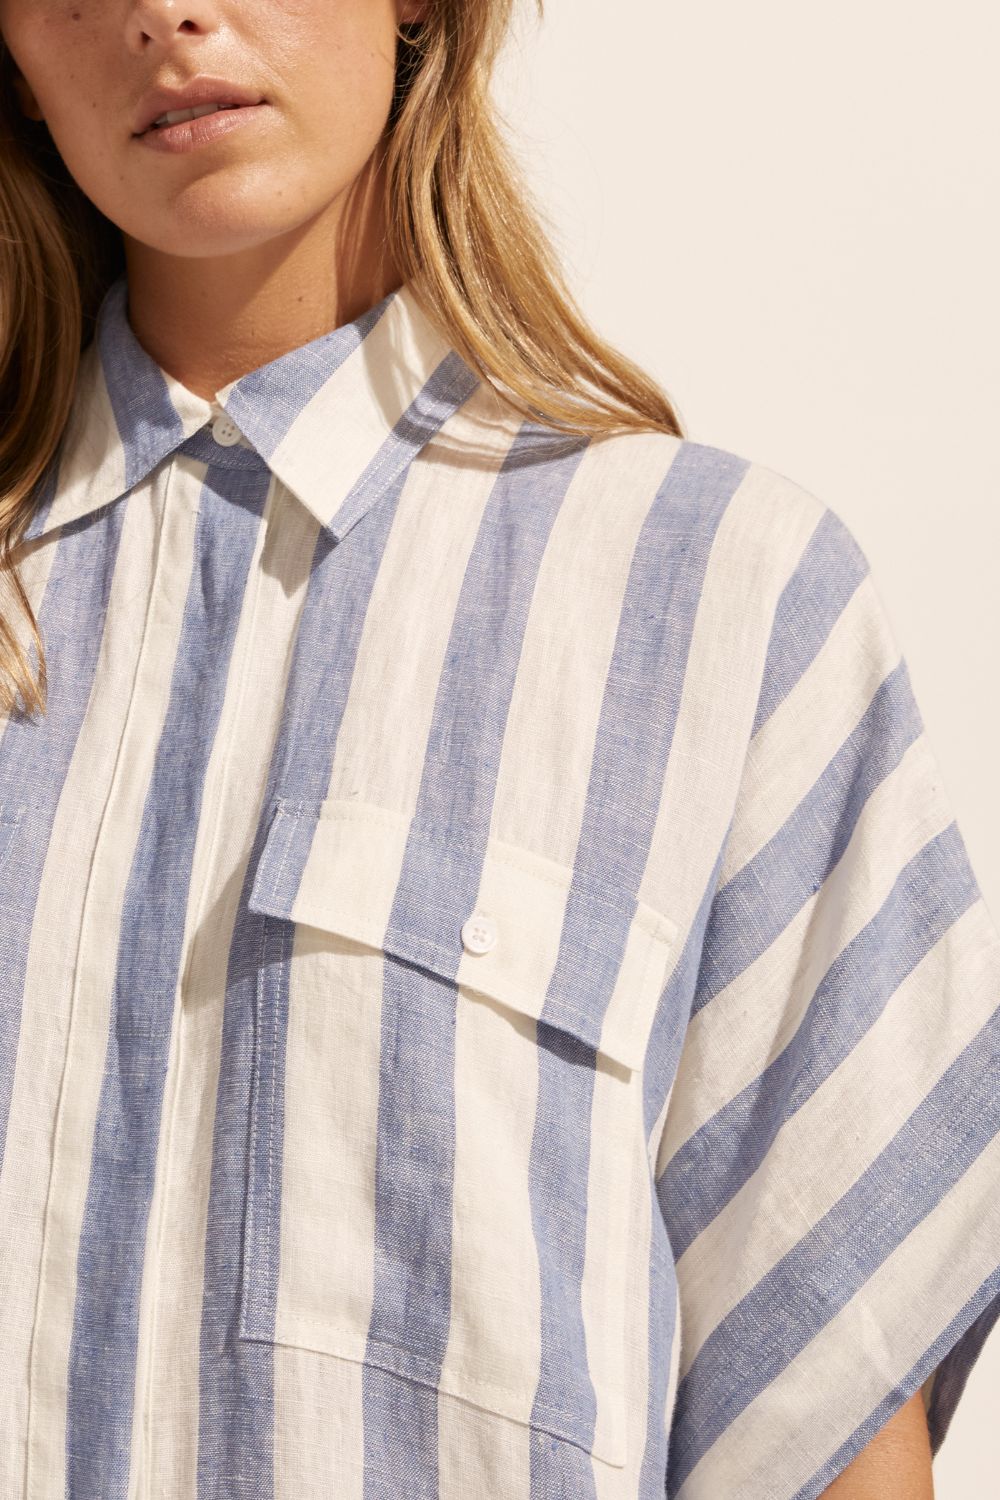 blue and white stripe, dress, mid length sleeves, oversized pockets, button down, collared dress, close up image